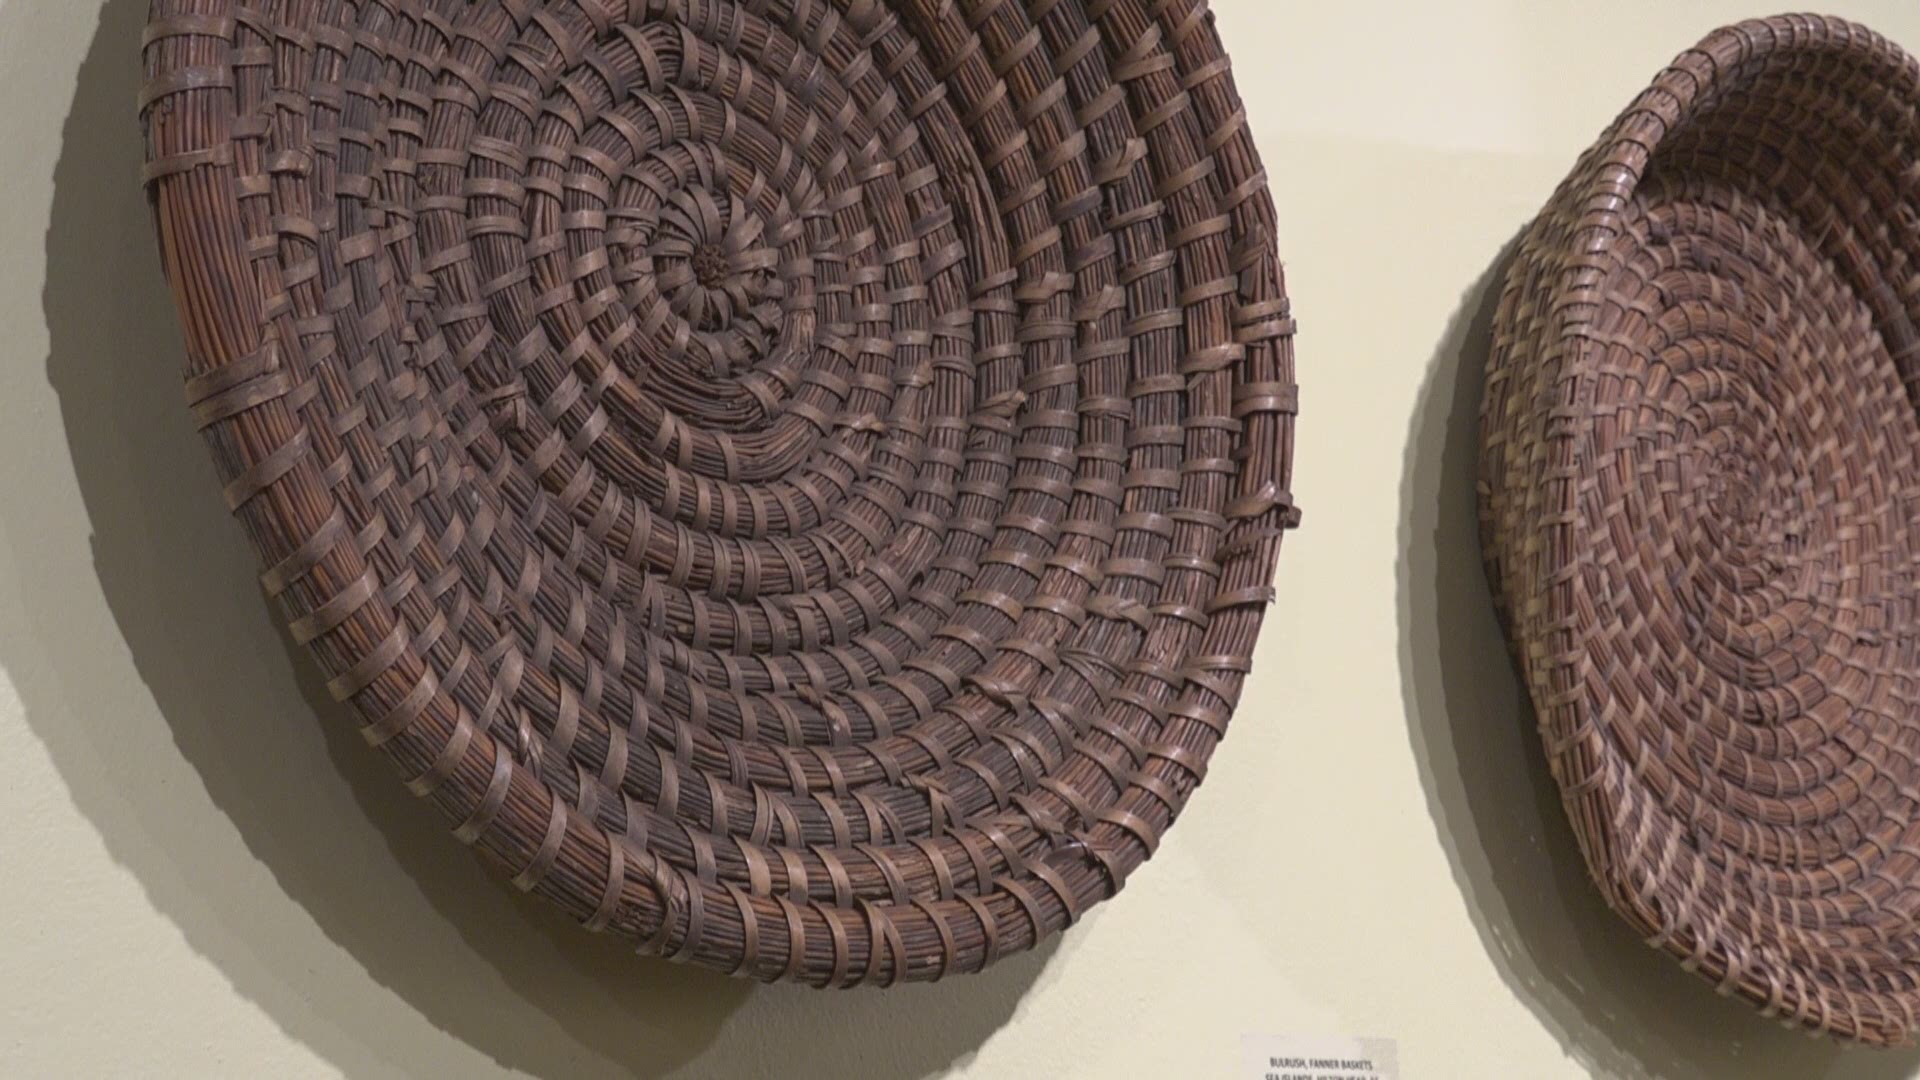 Collector Willis Hakim Jones talks about his collection of slave art and artifacts